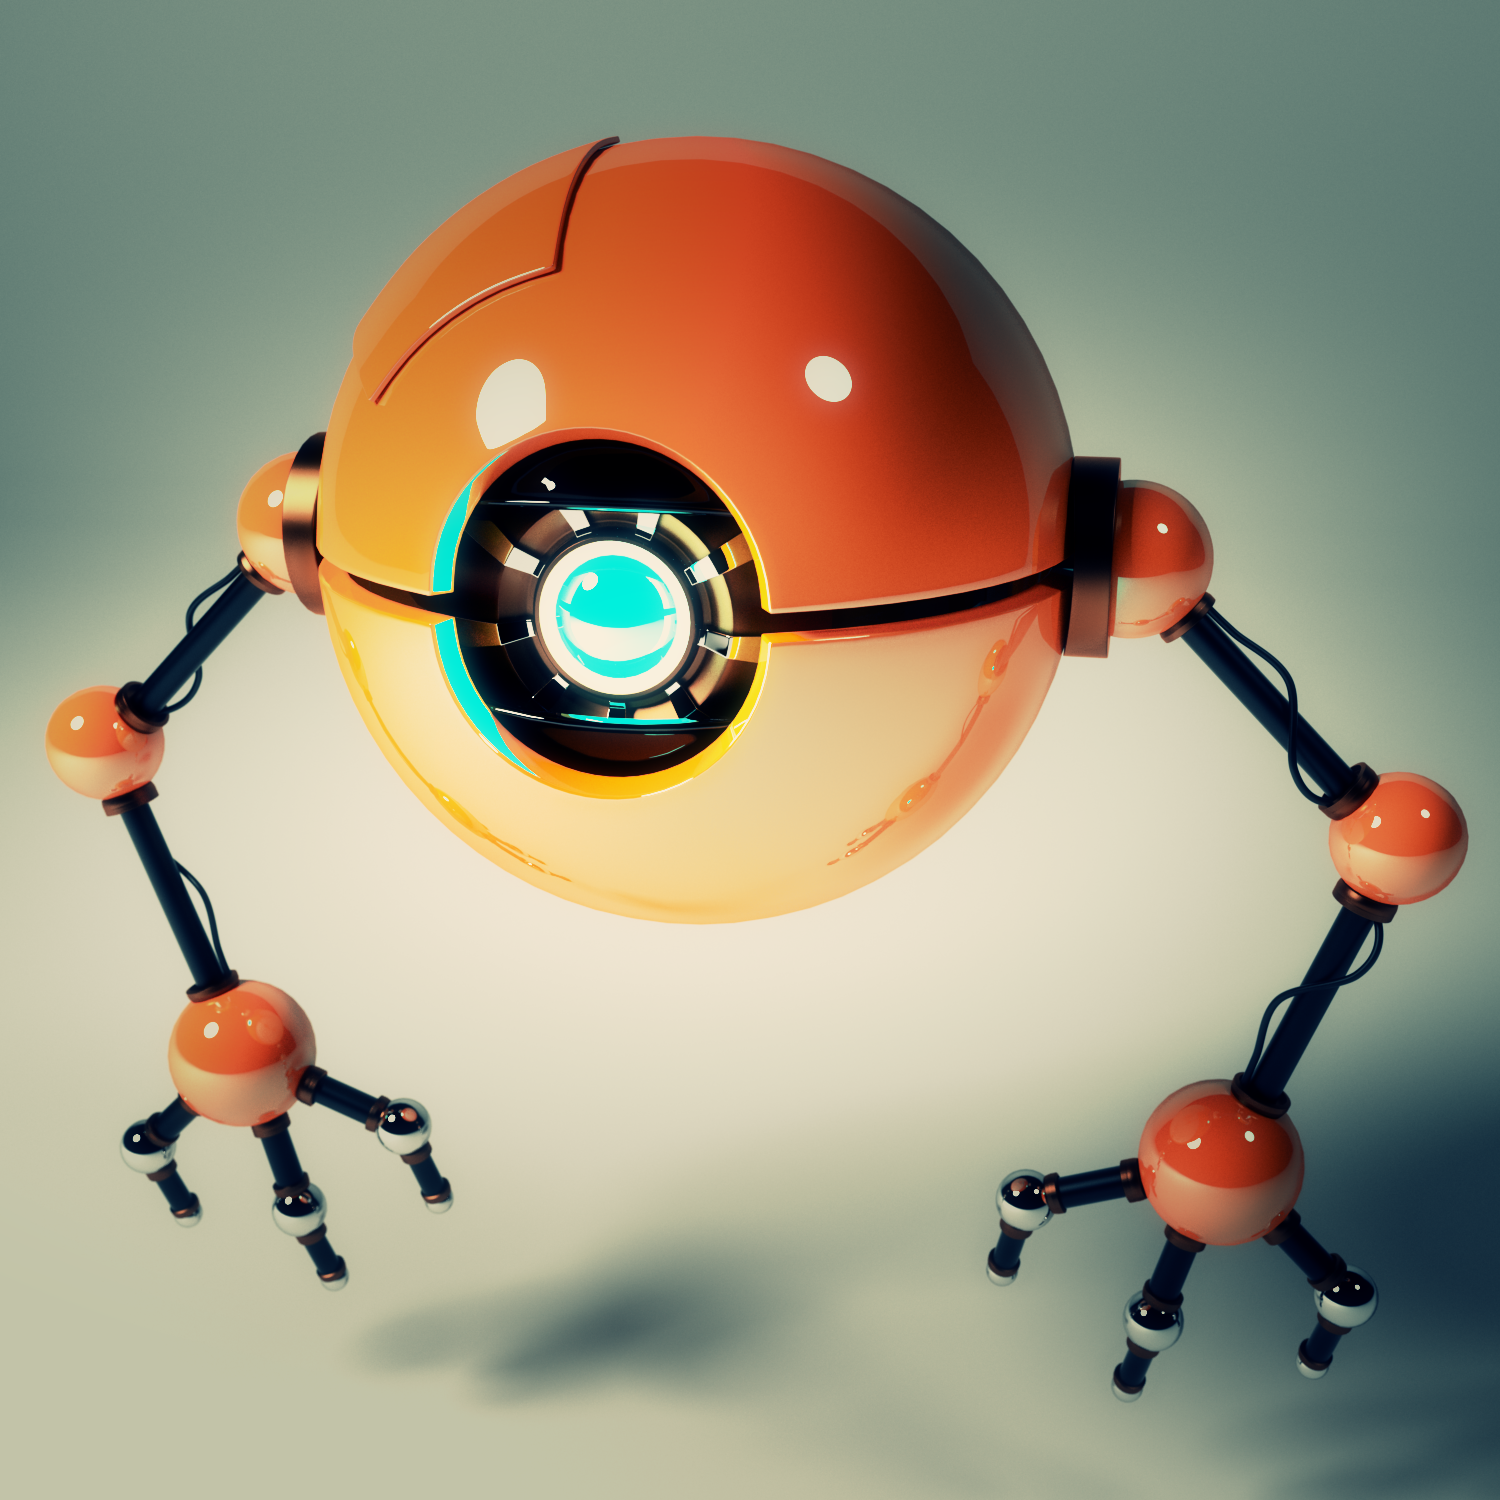 Little robot for my demoreel project